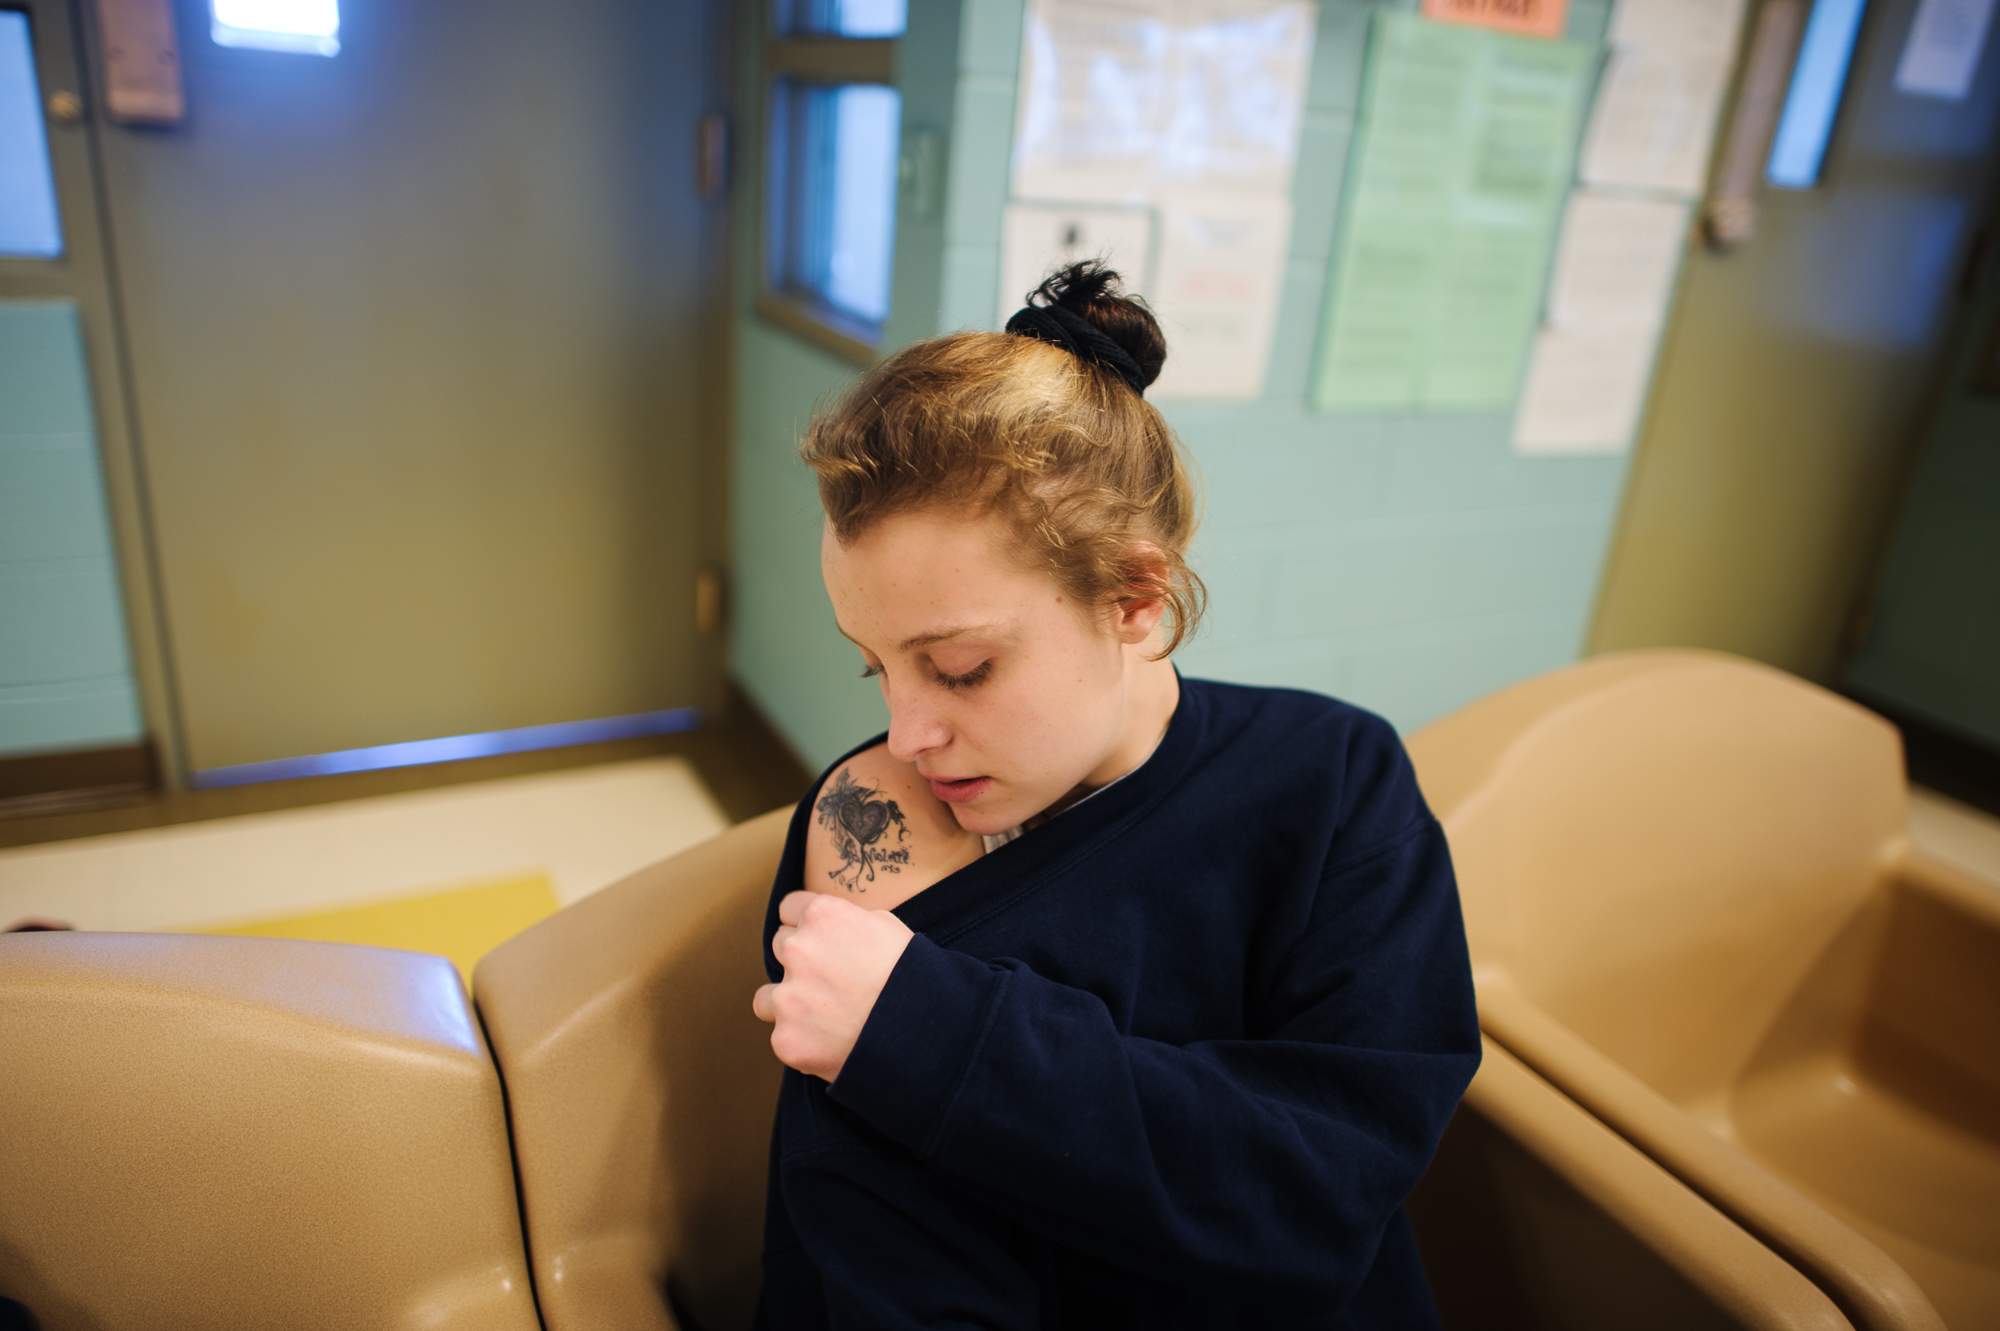  Alysia, age 16, looks at her tattoo, as she sits in the communal area at the juvenile detention center.  